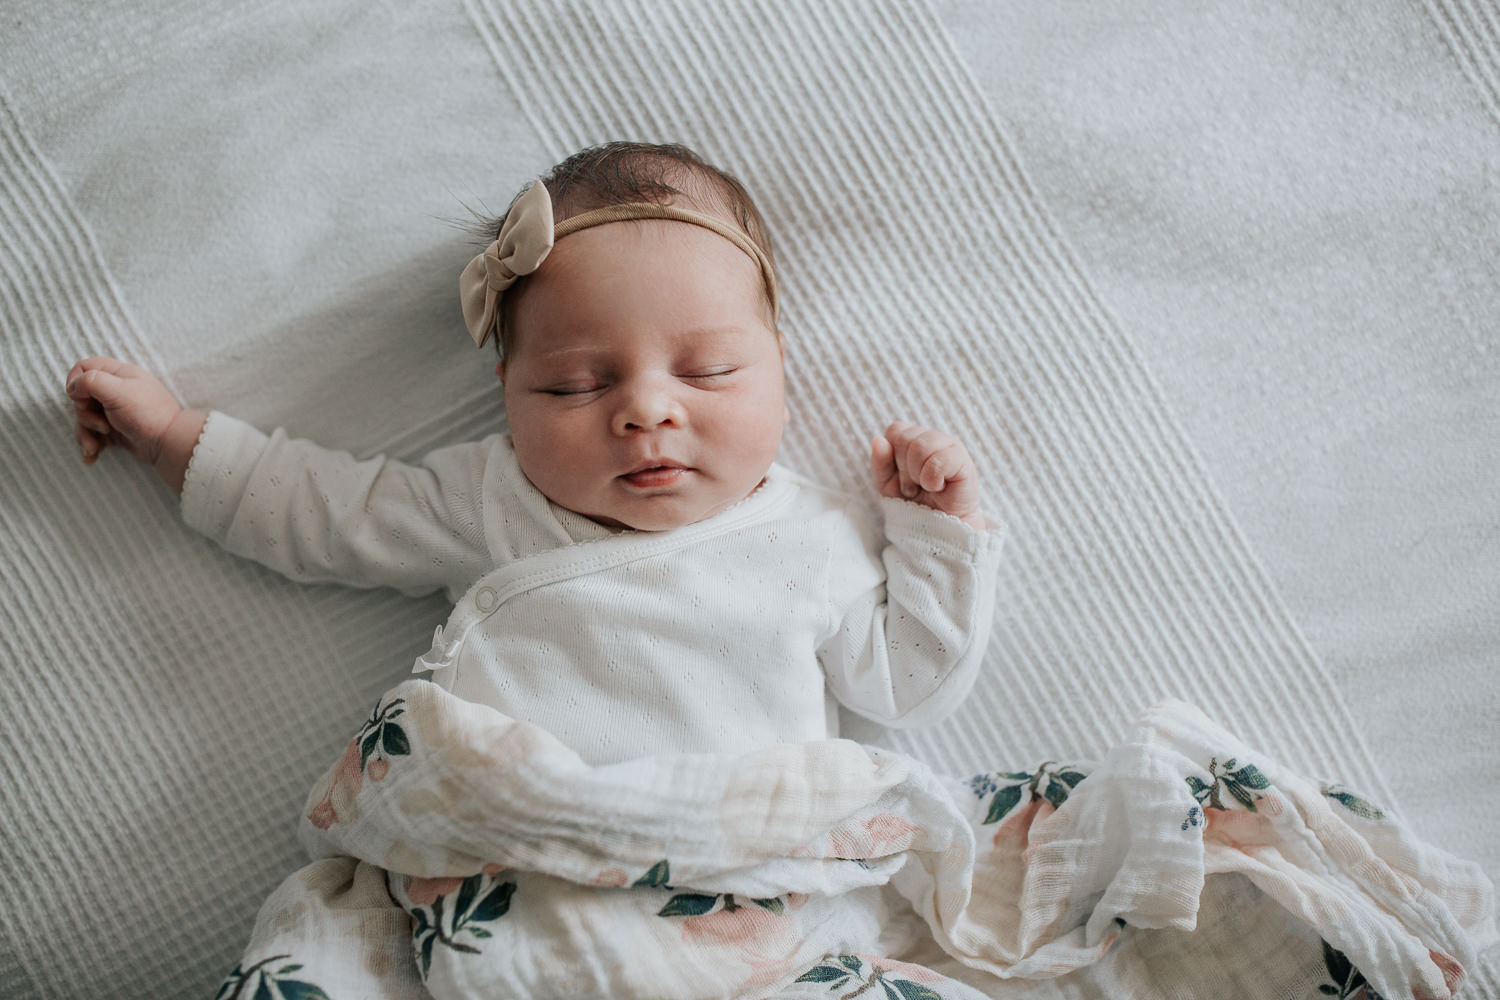 2 week old baby girl with dark hair in white onesie lying on swaddle with soft pink flowers, wearing bow headband asleep on bed, hands near face -​​​​​​​ Newmarket In-Home Photos